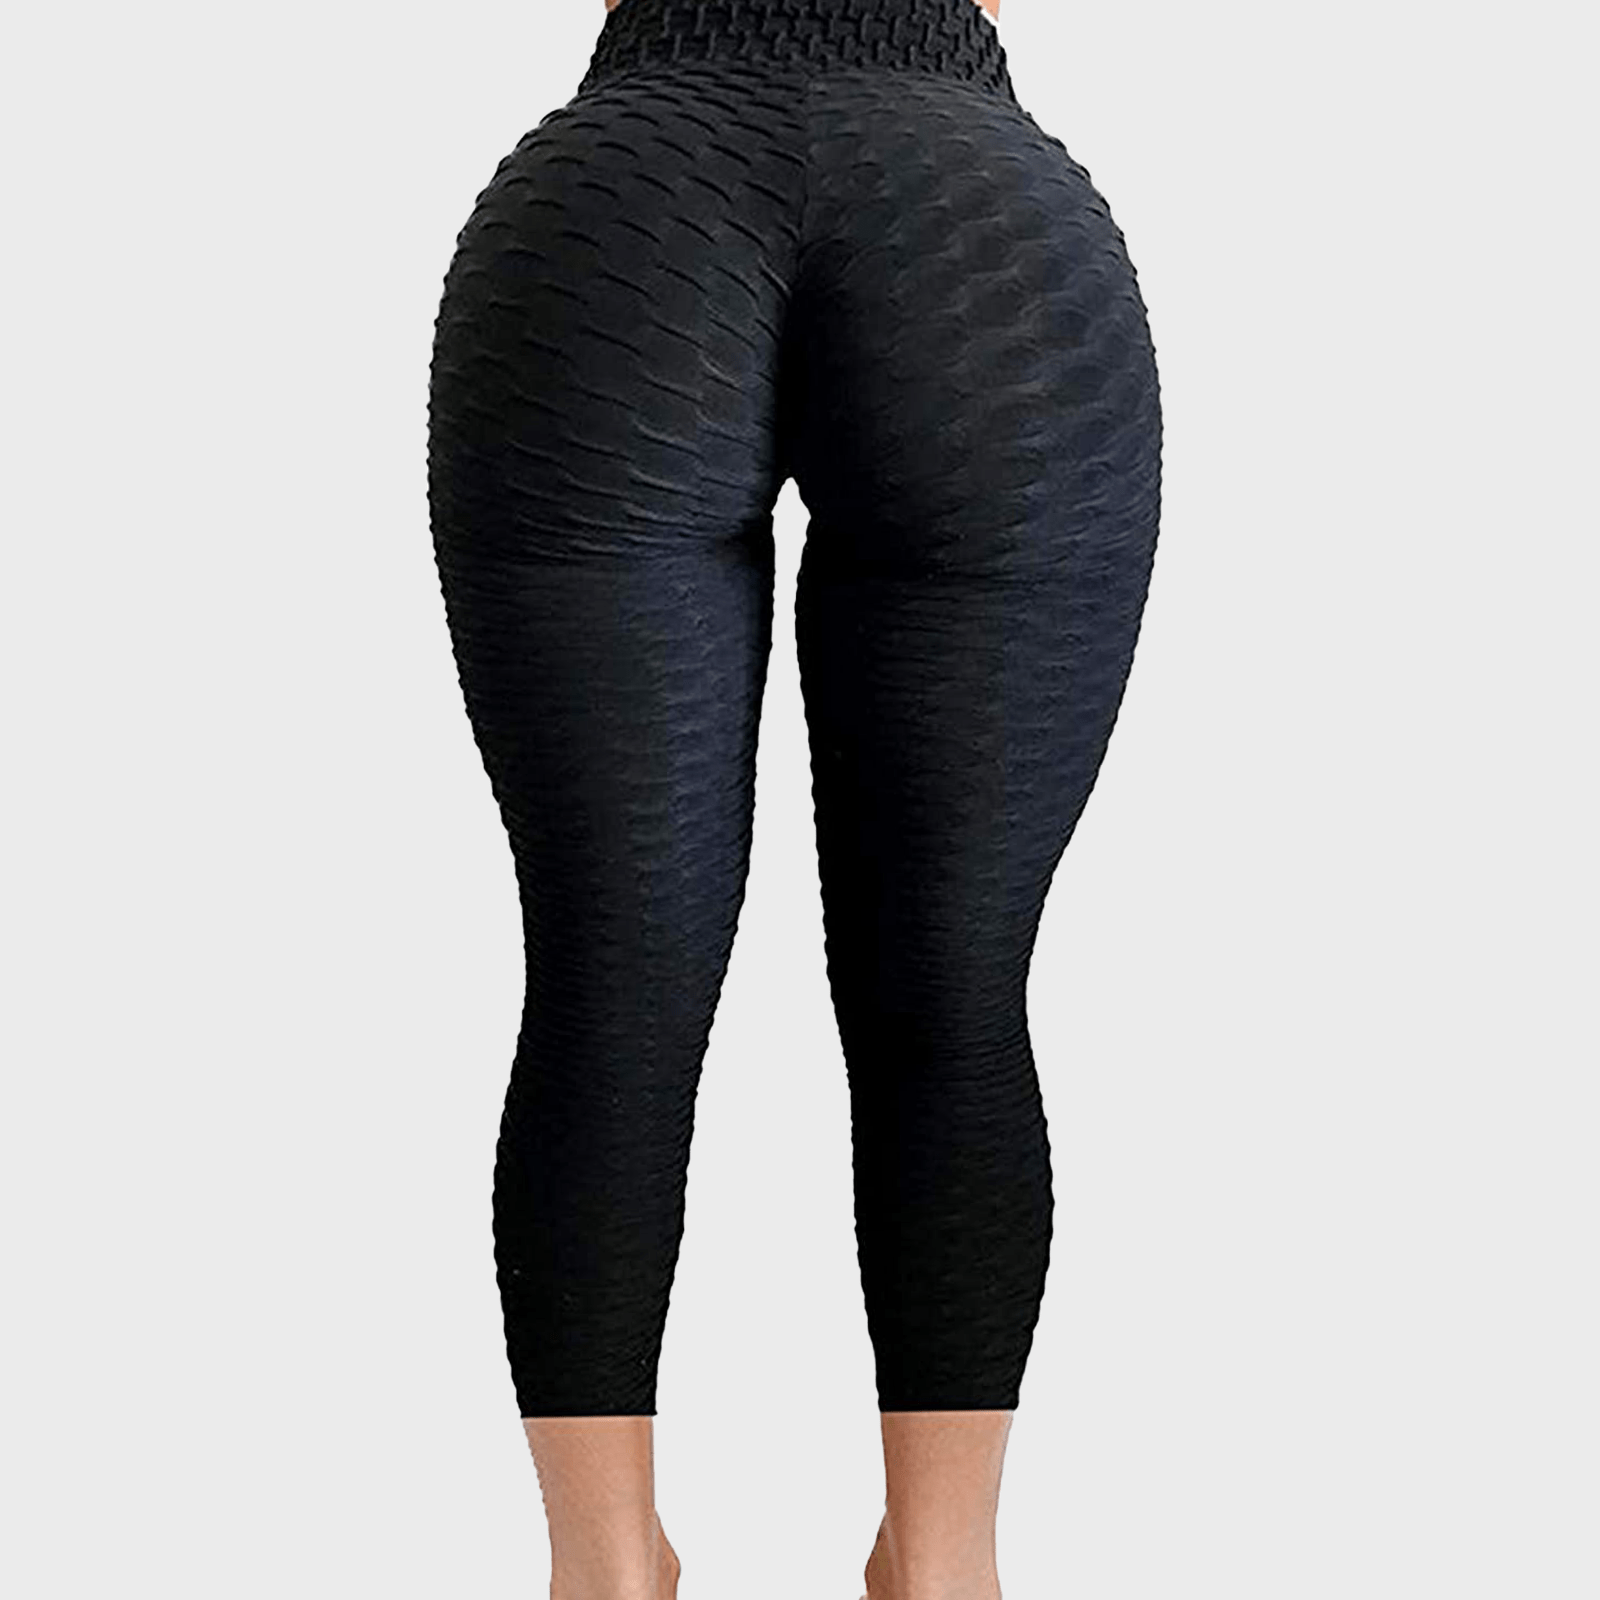 Womens Scrunch Butt Leggings Ruched Booty Lifting Buttery Soft Yoga Pants  High Waist Workout Sports Tights 